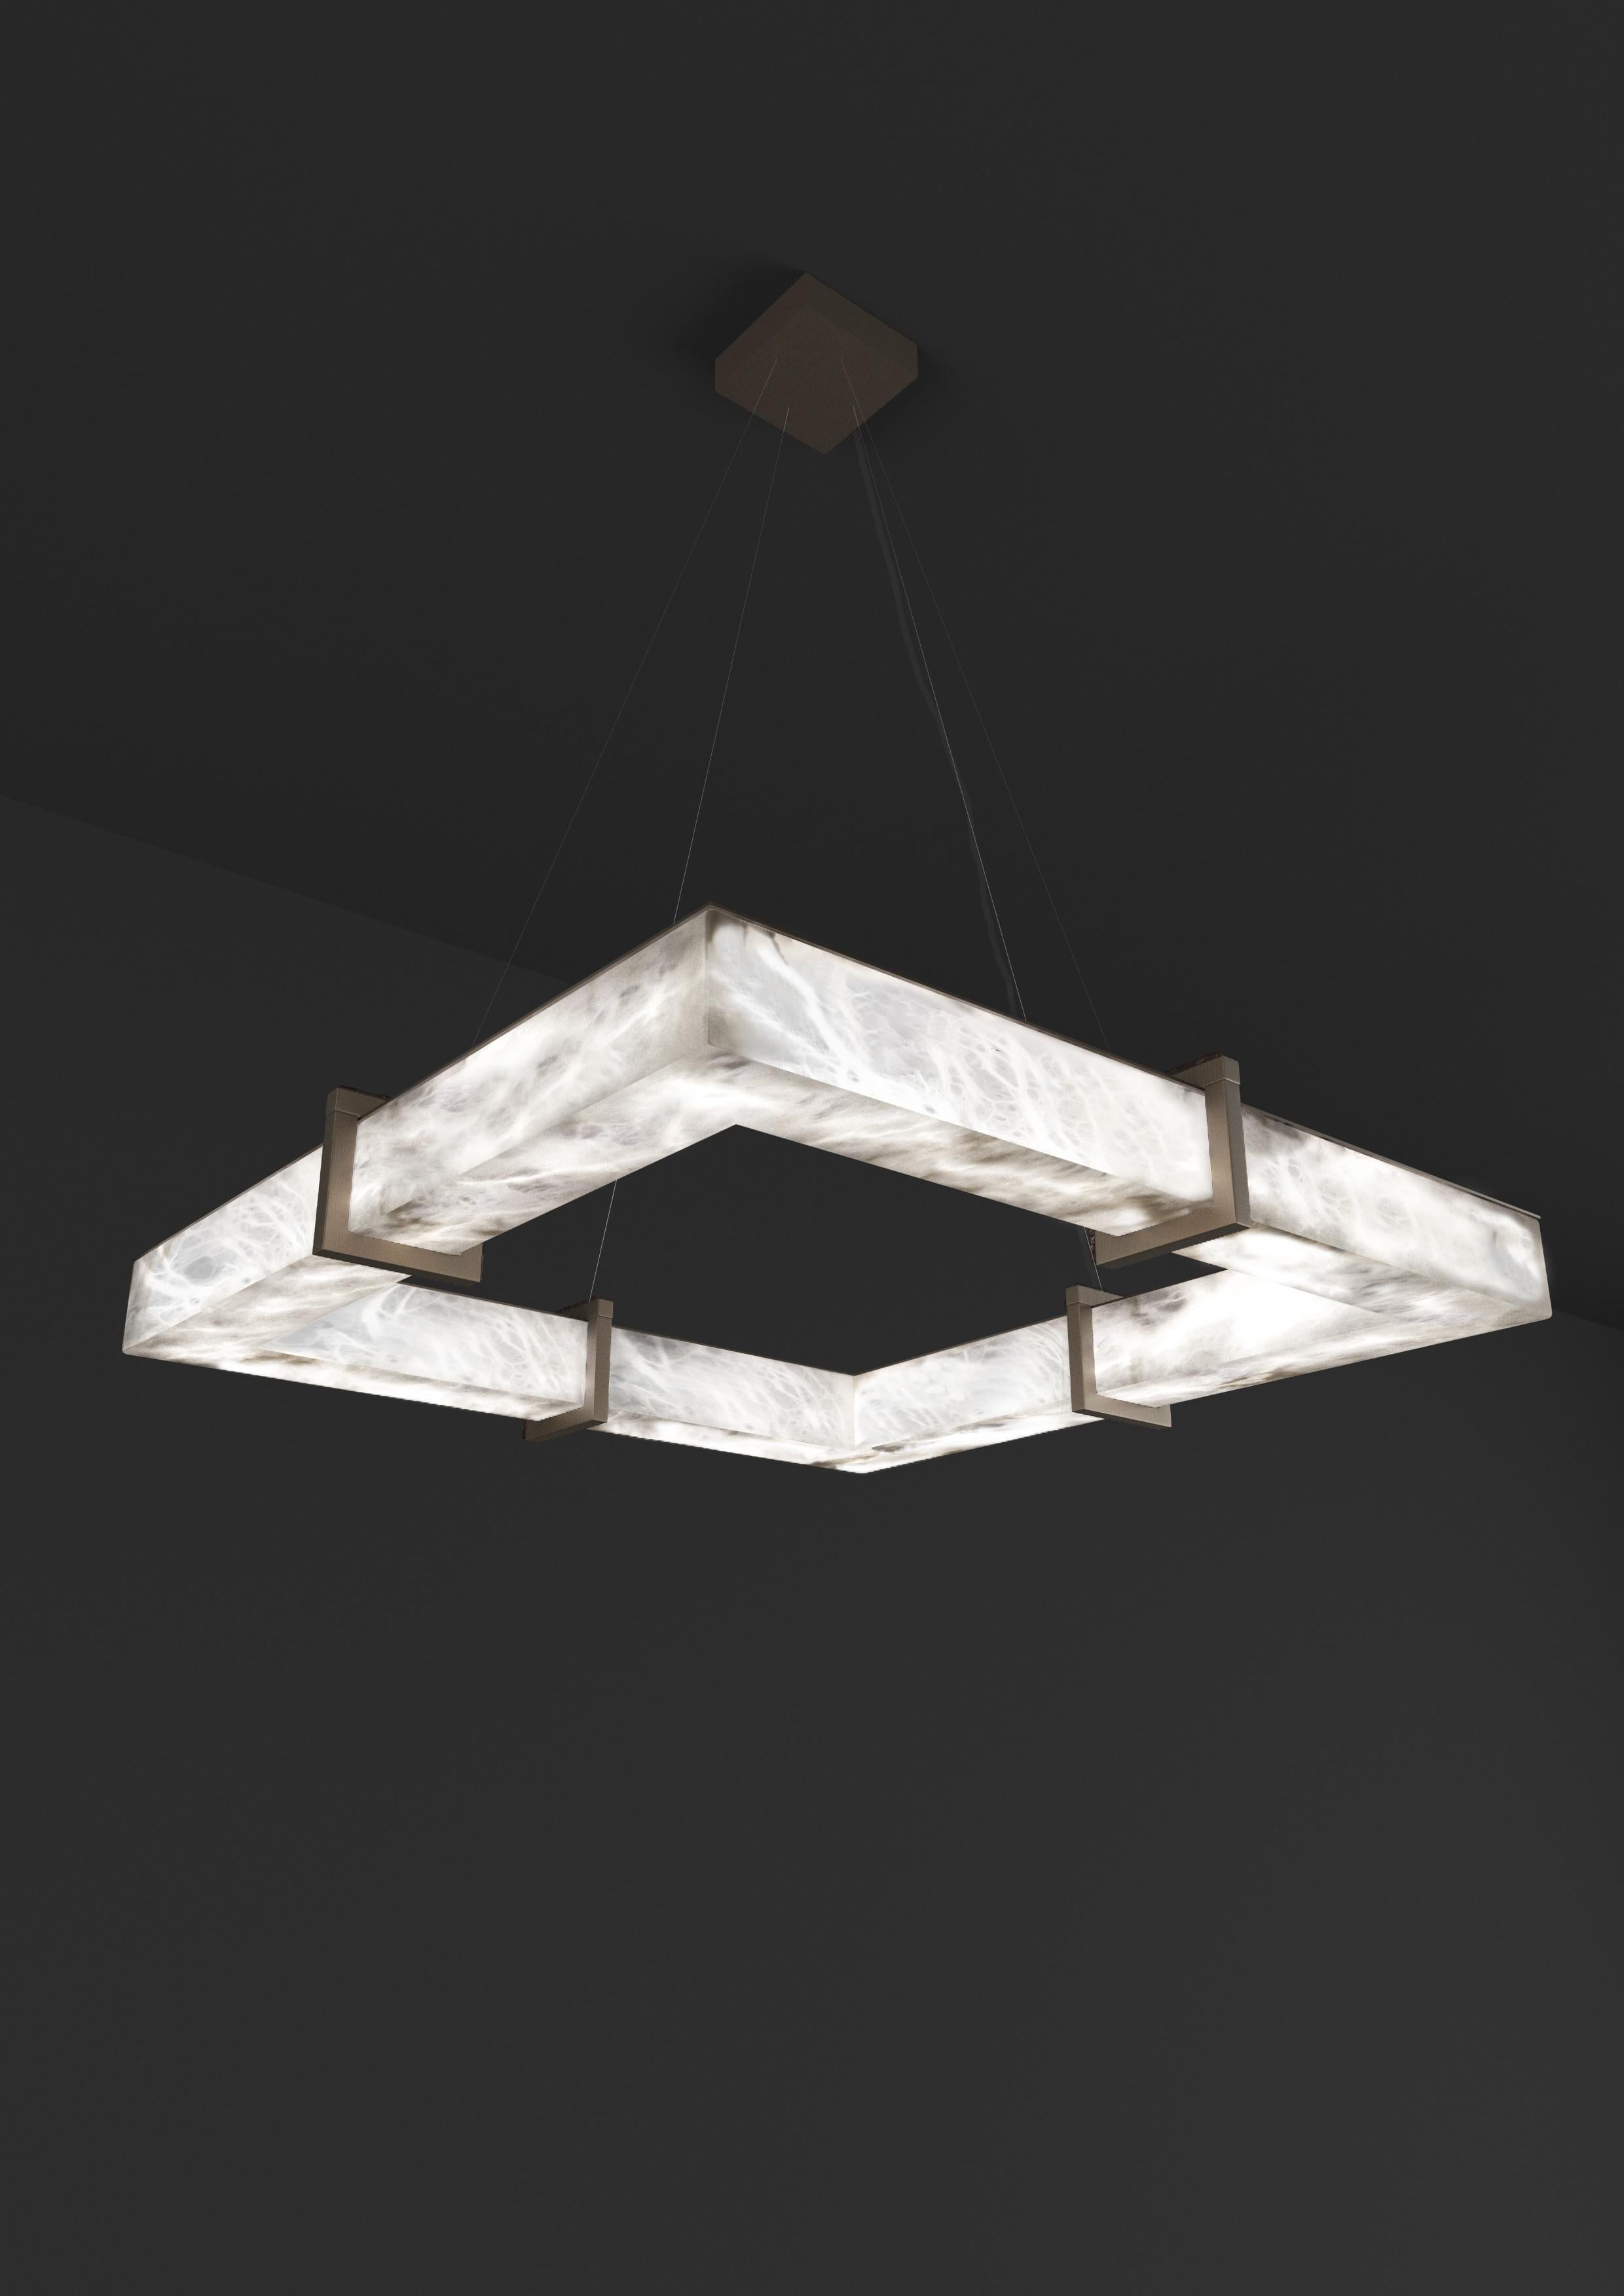 Talassa Brushed Burnished Metal Pendant Lamp by Alabastro Italiano
Dimensions: D 80 x W 80 x H 11 cm.
Materials: White alabaster and metal.

Available in different finishes: Shiny Silver, Bronze, Brushed Brass, Ruggine of Florence, Brushed